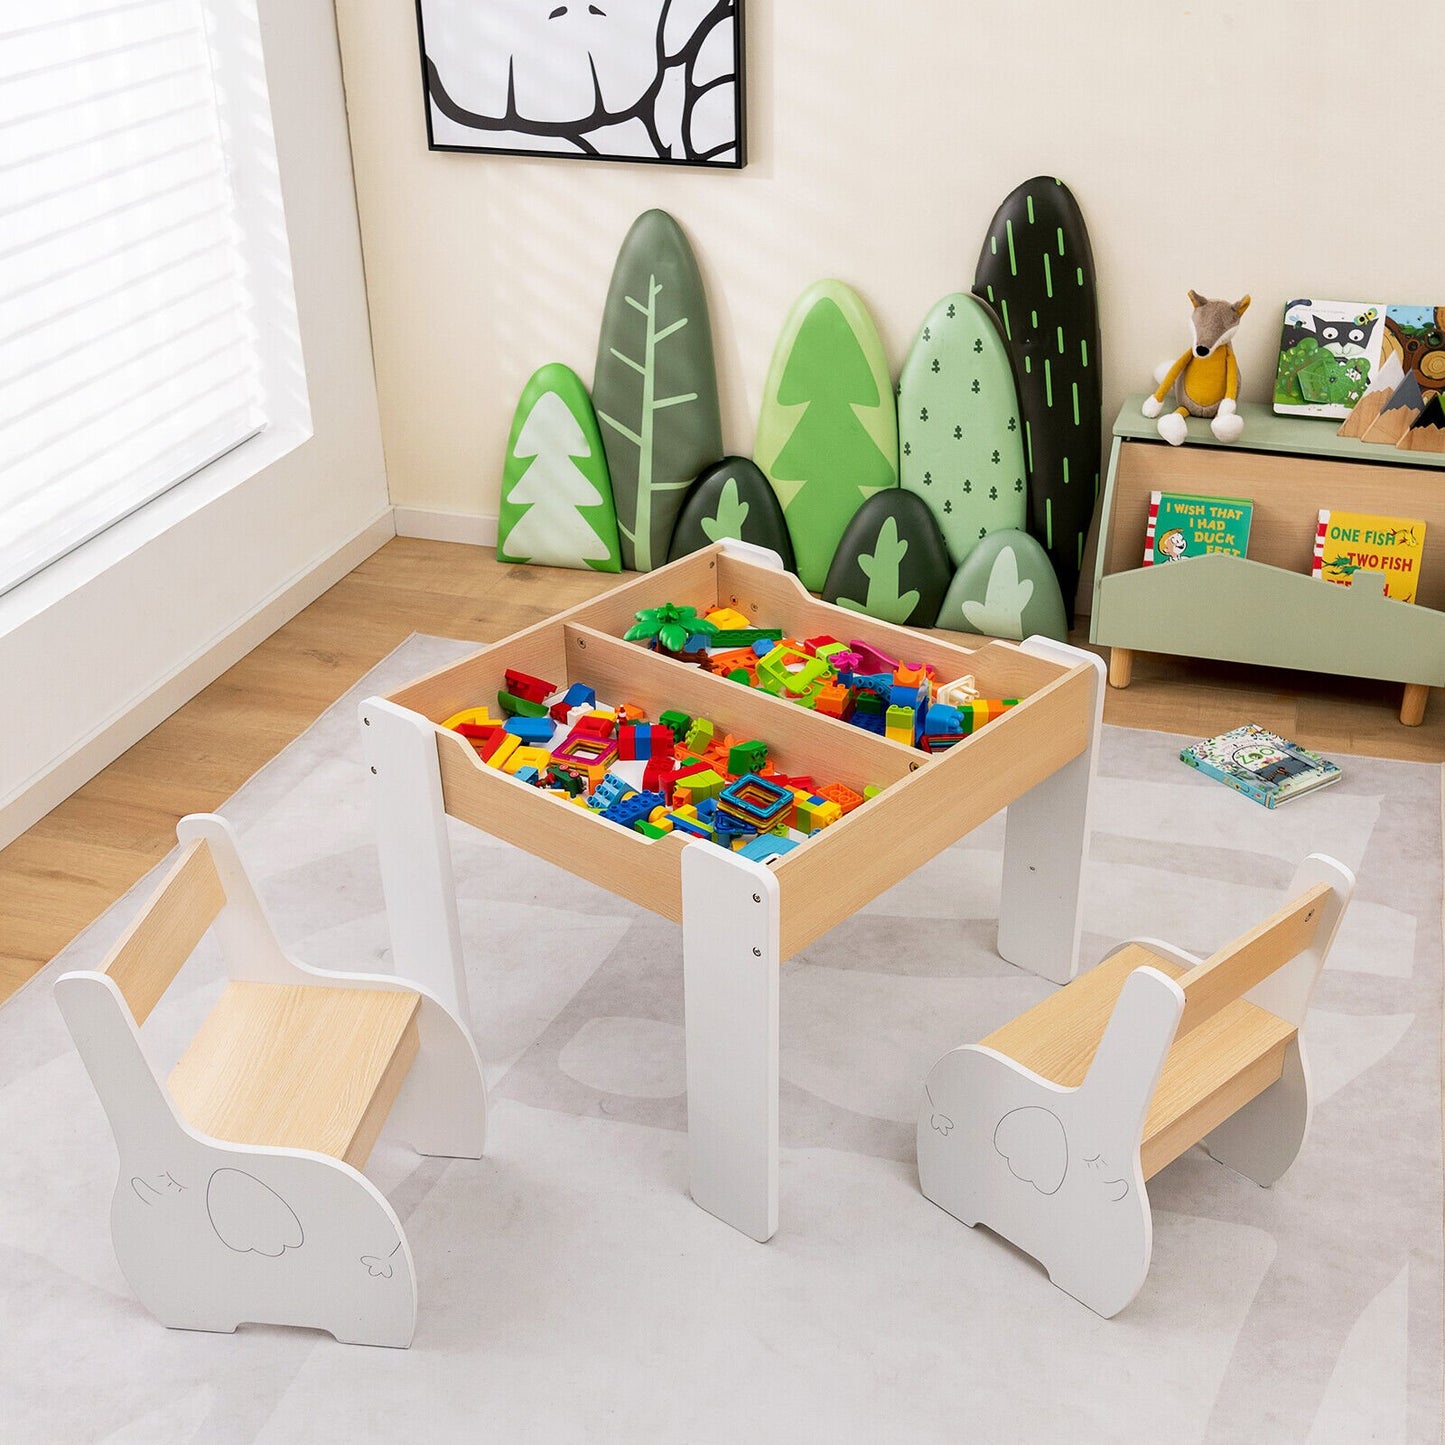 4-in-1 Wooden Activity Kids Table and Chairs with Storage and Detachable Blackboard, White